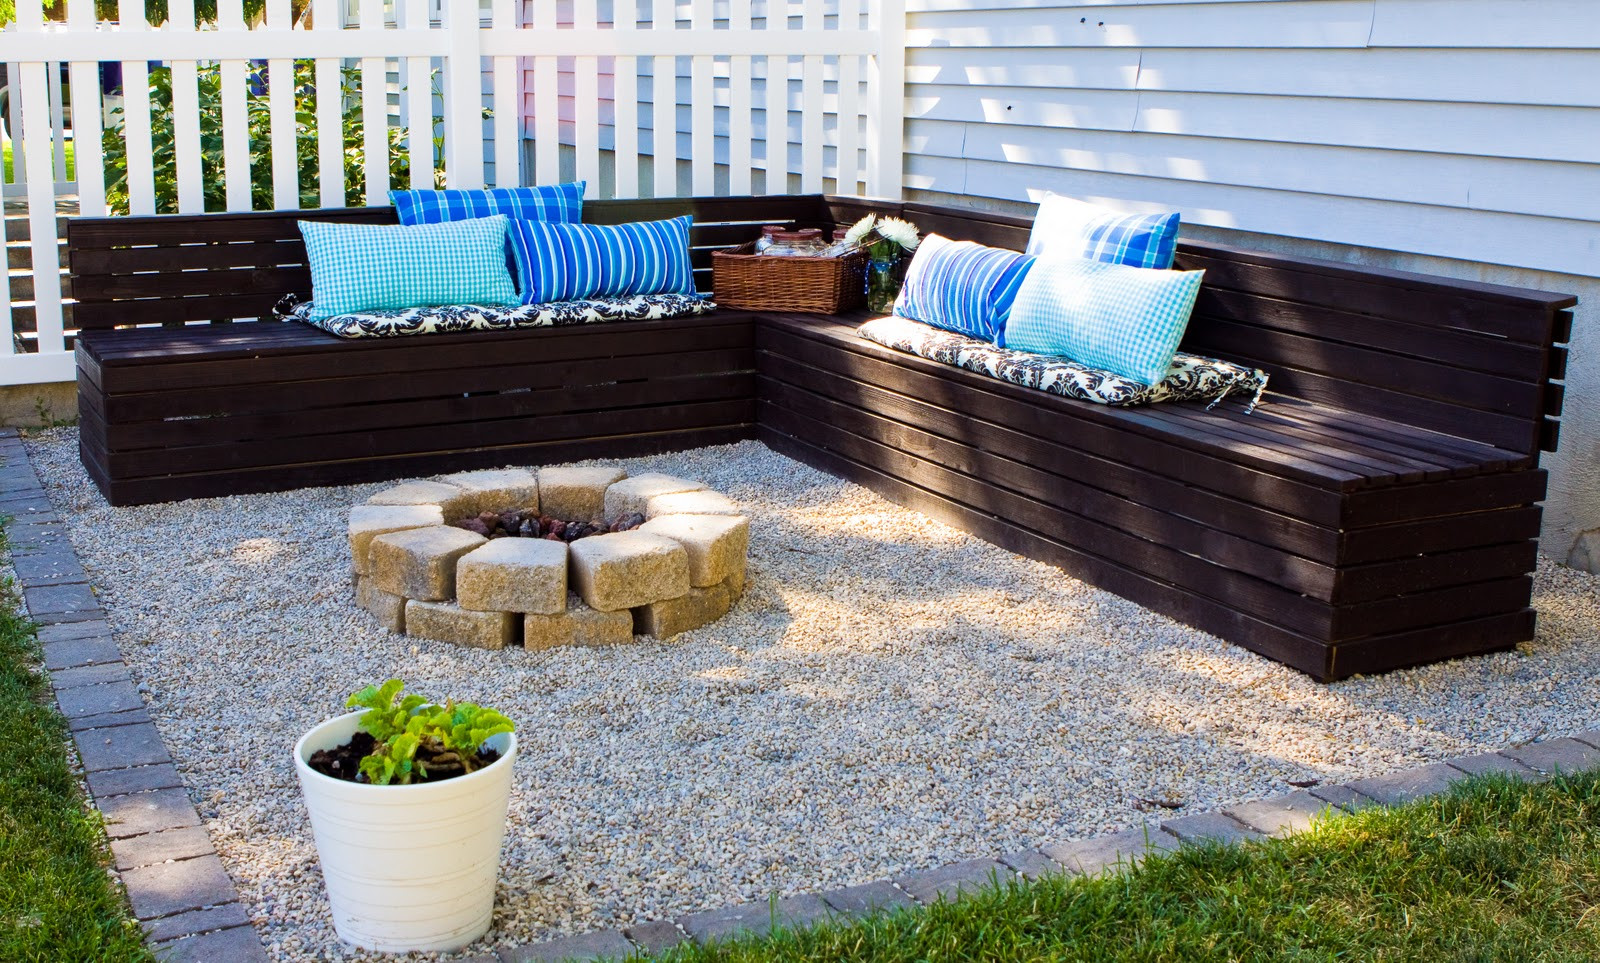 Diy Fire Pit Bench
 Bird and Berry Fire Pit Area and Benches